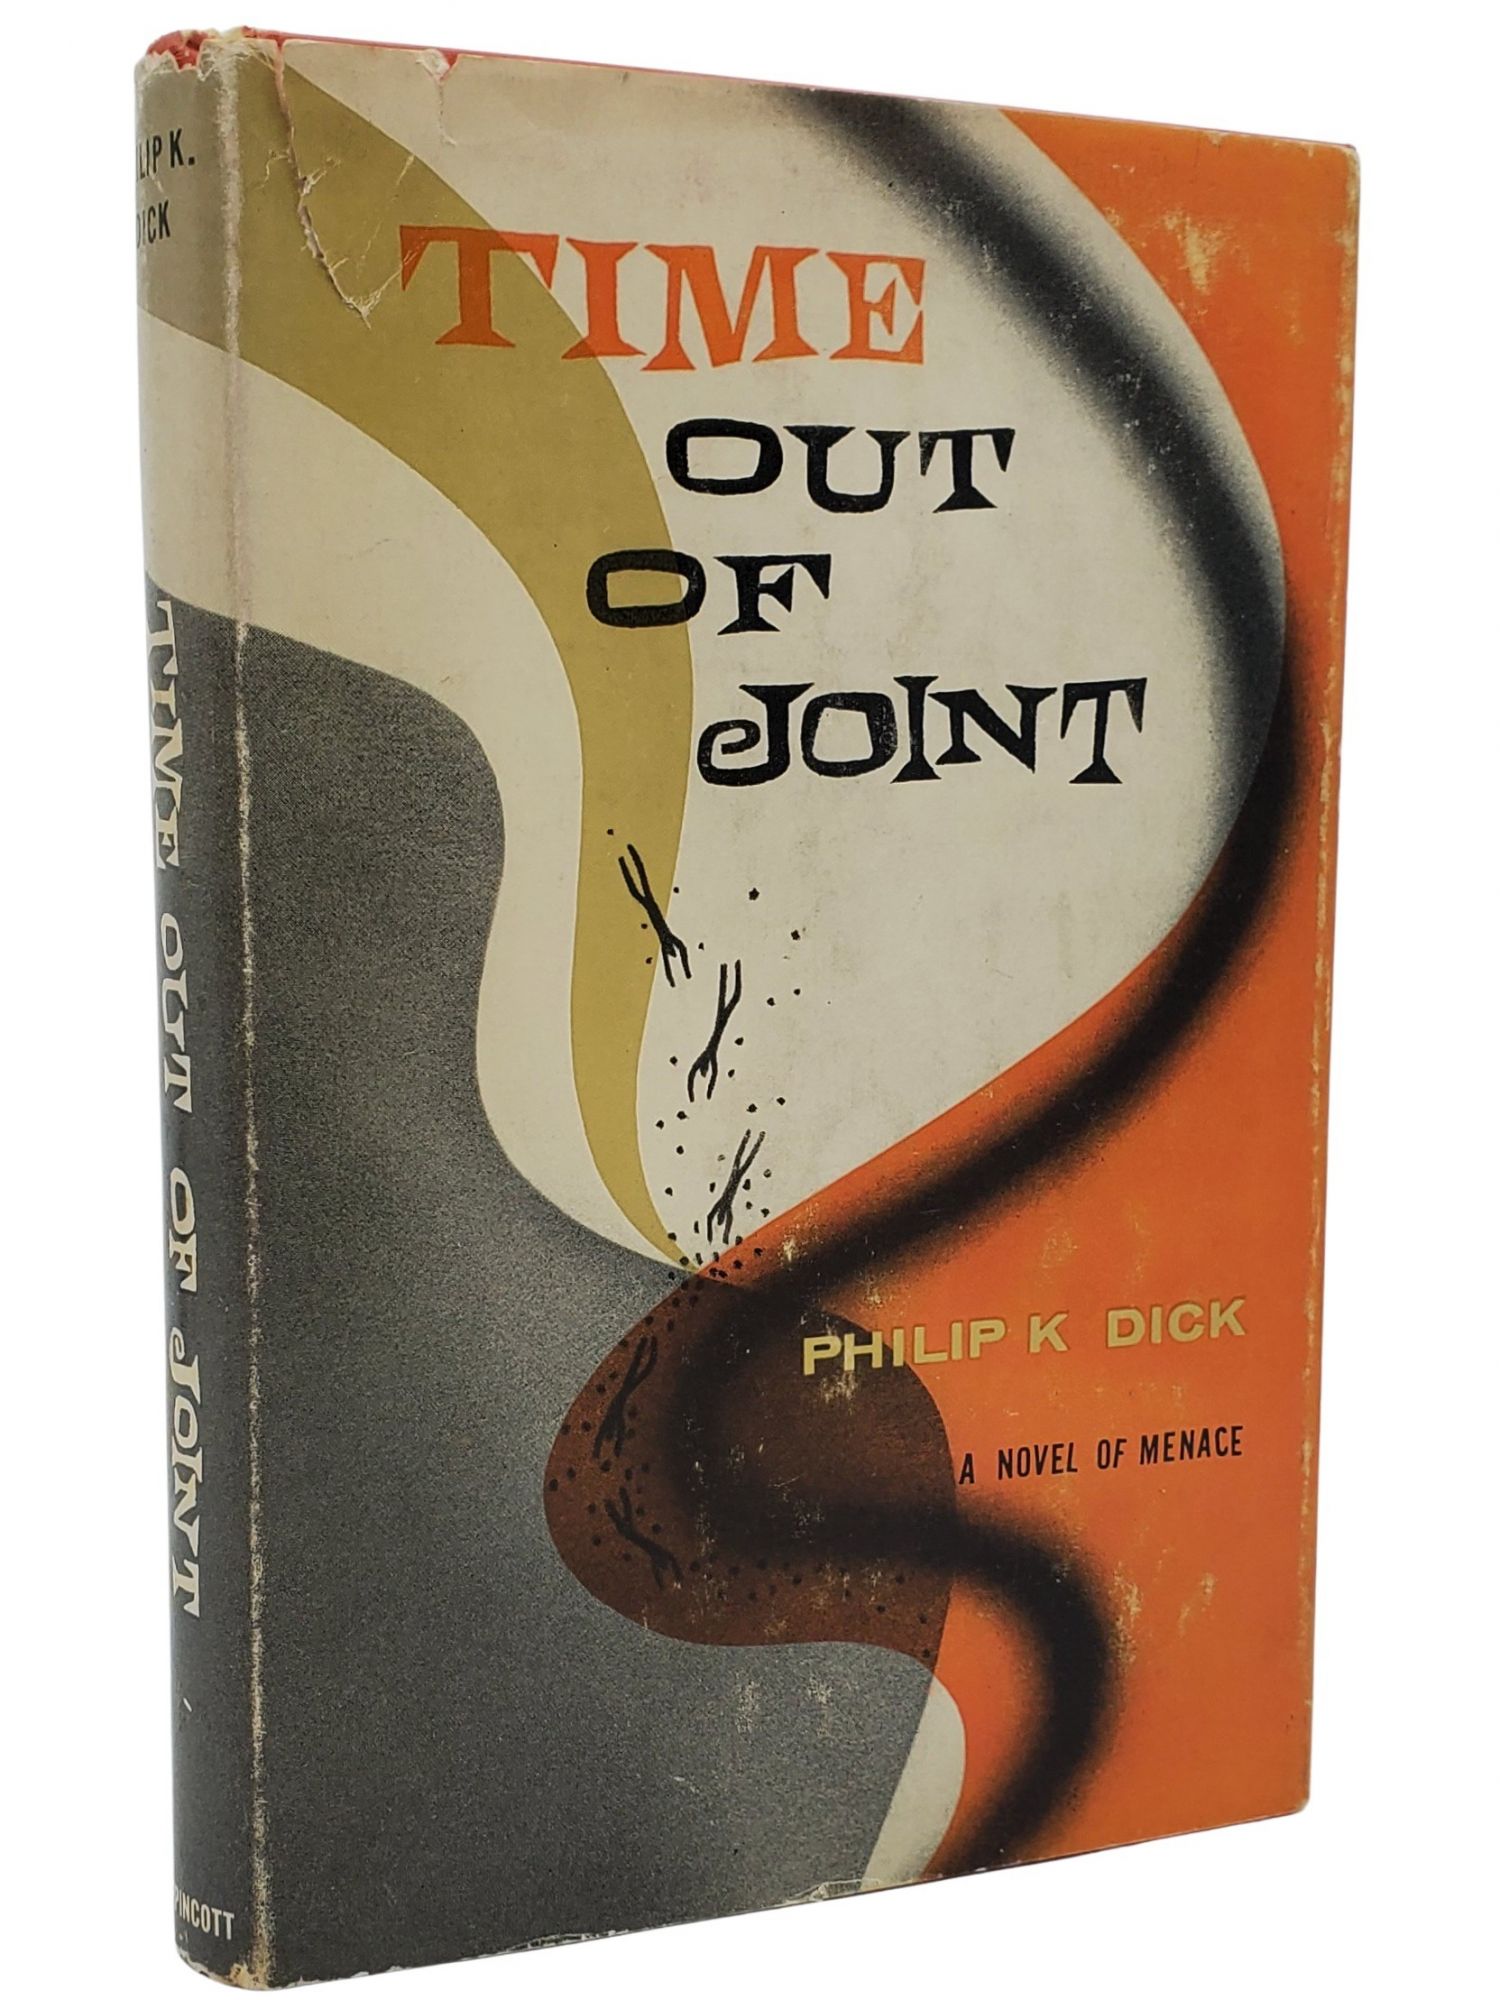 [Book #50234] TIME OUT OF JOINT. Philip K. Dick.